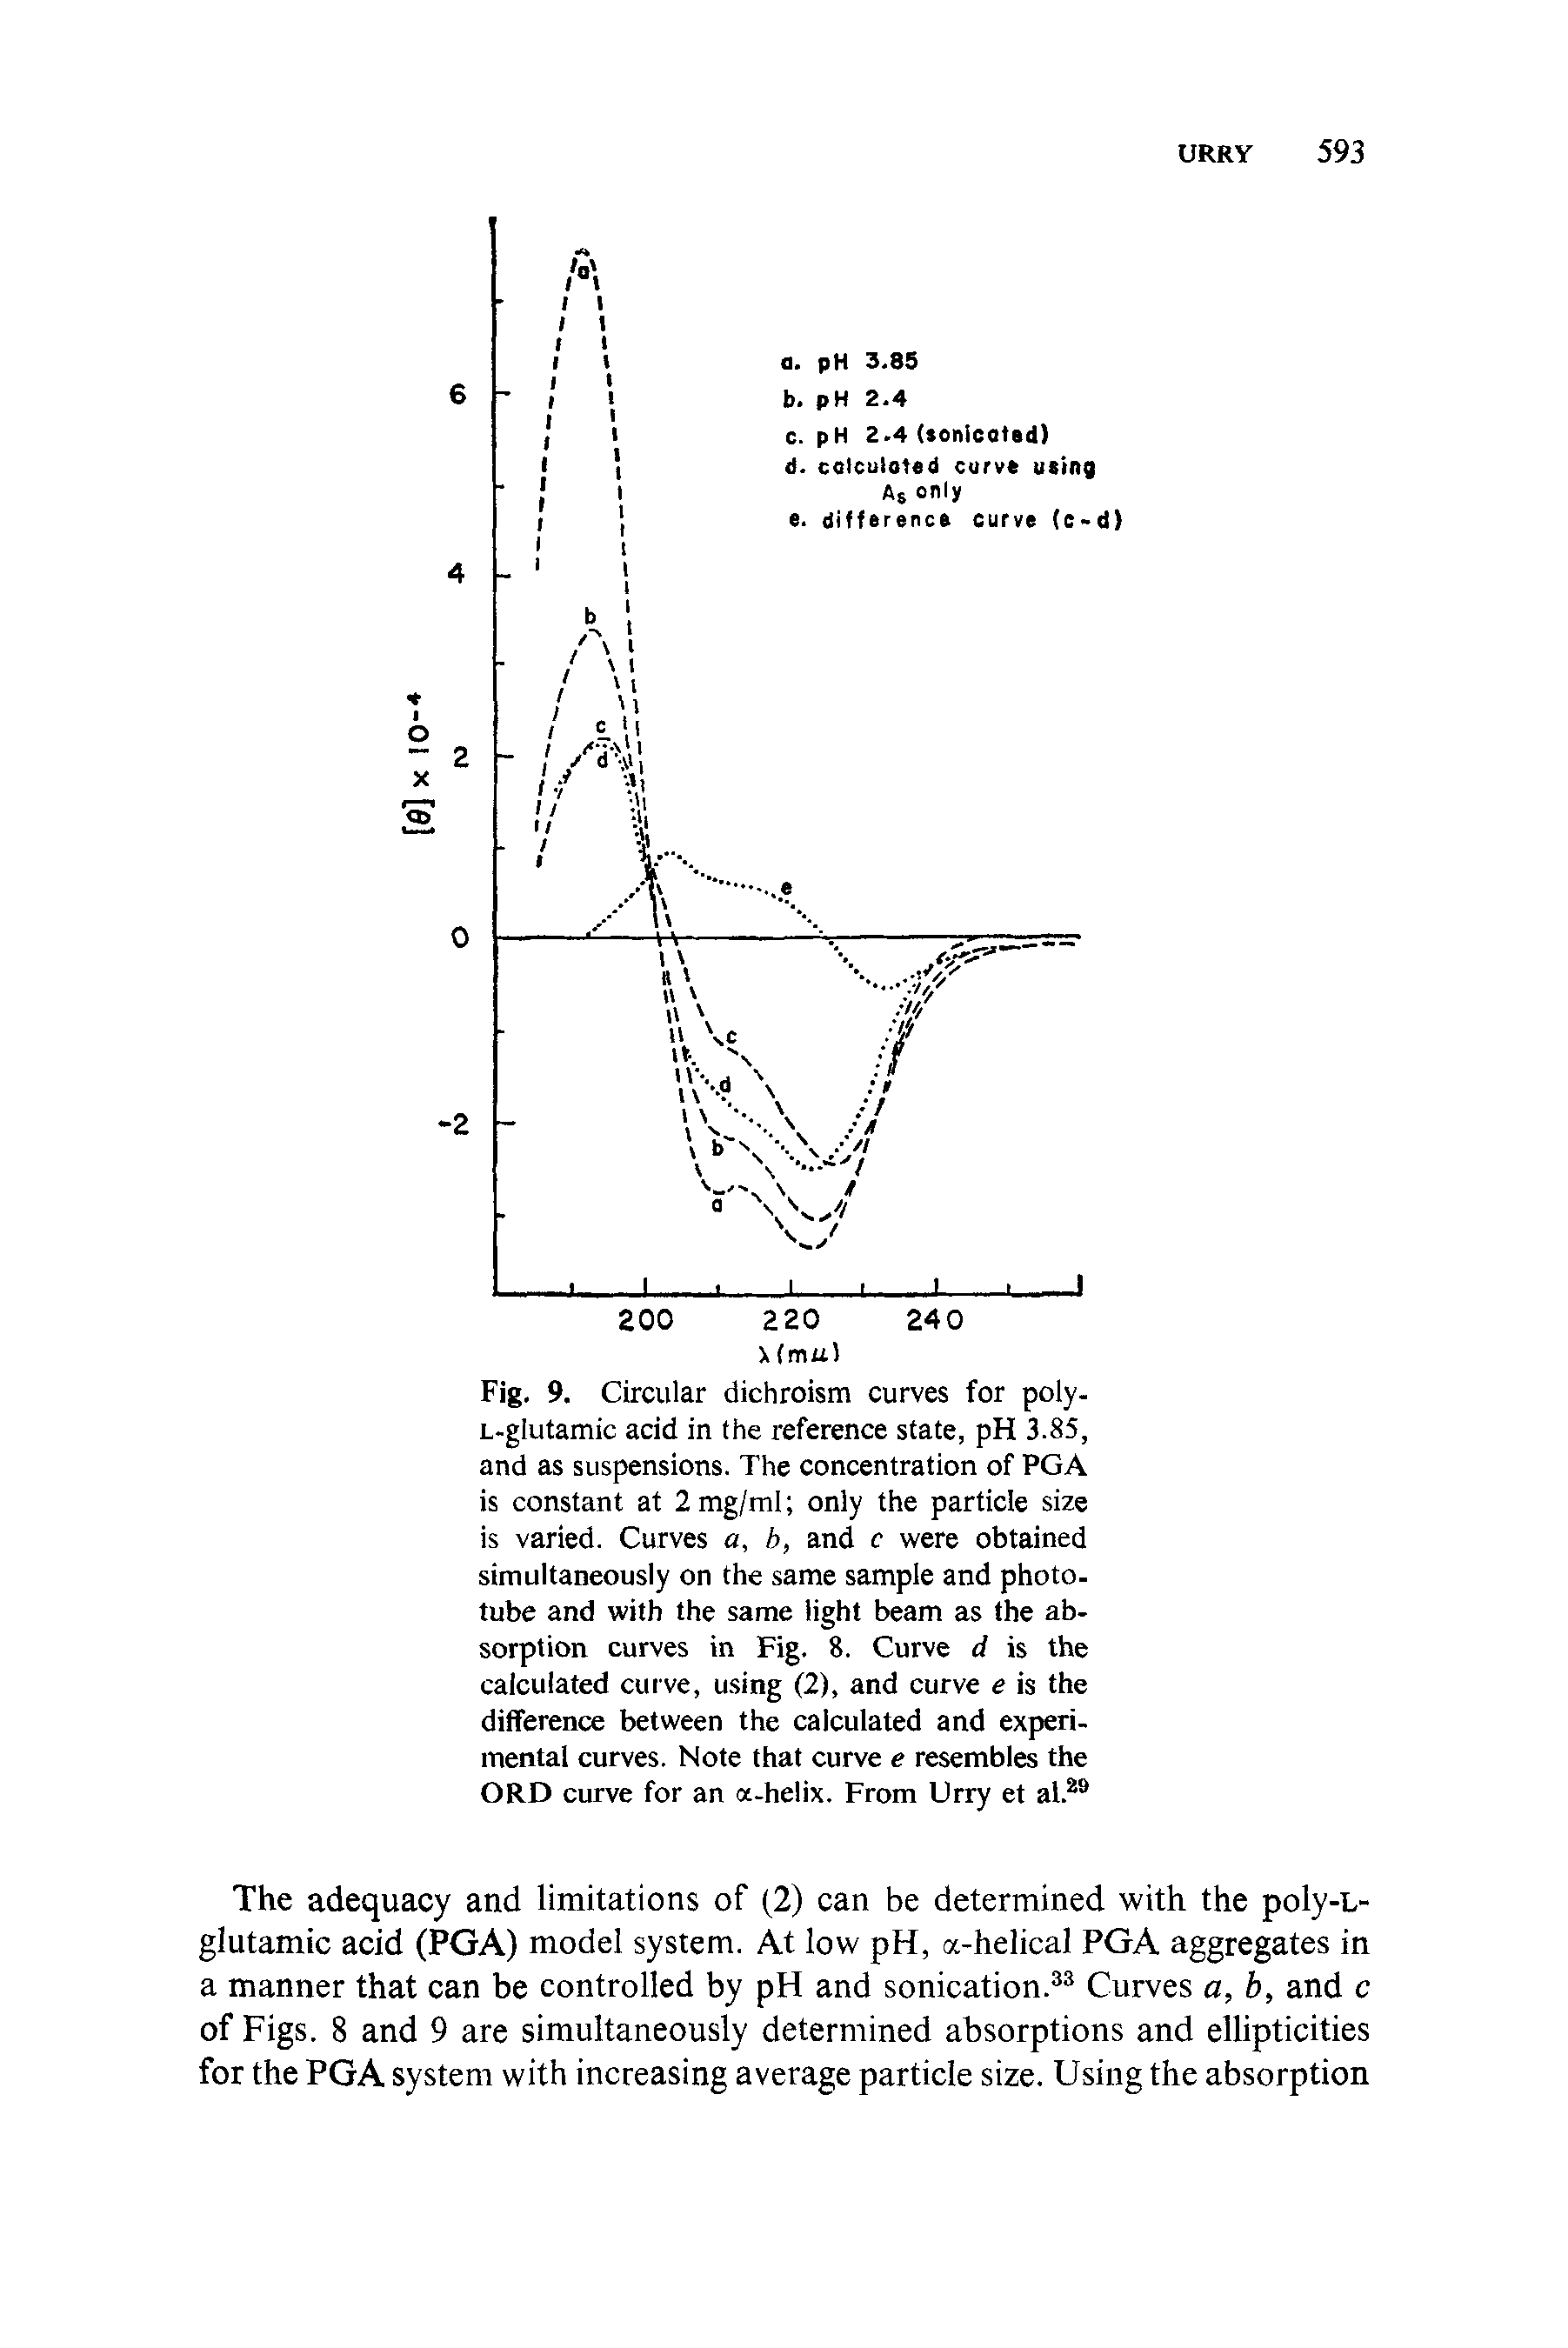 Fig. 9. Circular dichroism curves for poly-L-glutamic acid in the reference state, pH 3.85, and as suspensions. The concentration of PGA is constant at 2mg/ml only the particle size is varied. Curves , h, and c were obtained simultaneously on the same sample and phototube and with the same light beam as the absorption curves in Fig. 8. Curve d is the calculated cui ve, using (2), and curve e is the difference between the calculated and experimental curves. Note that curve e resembles the ORD curve for an a-helix. From Urry et al. ...